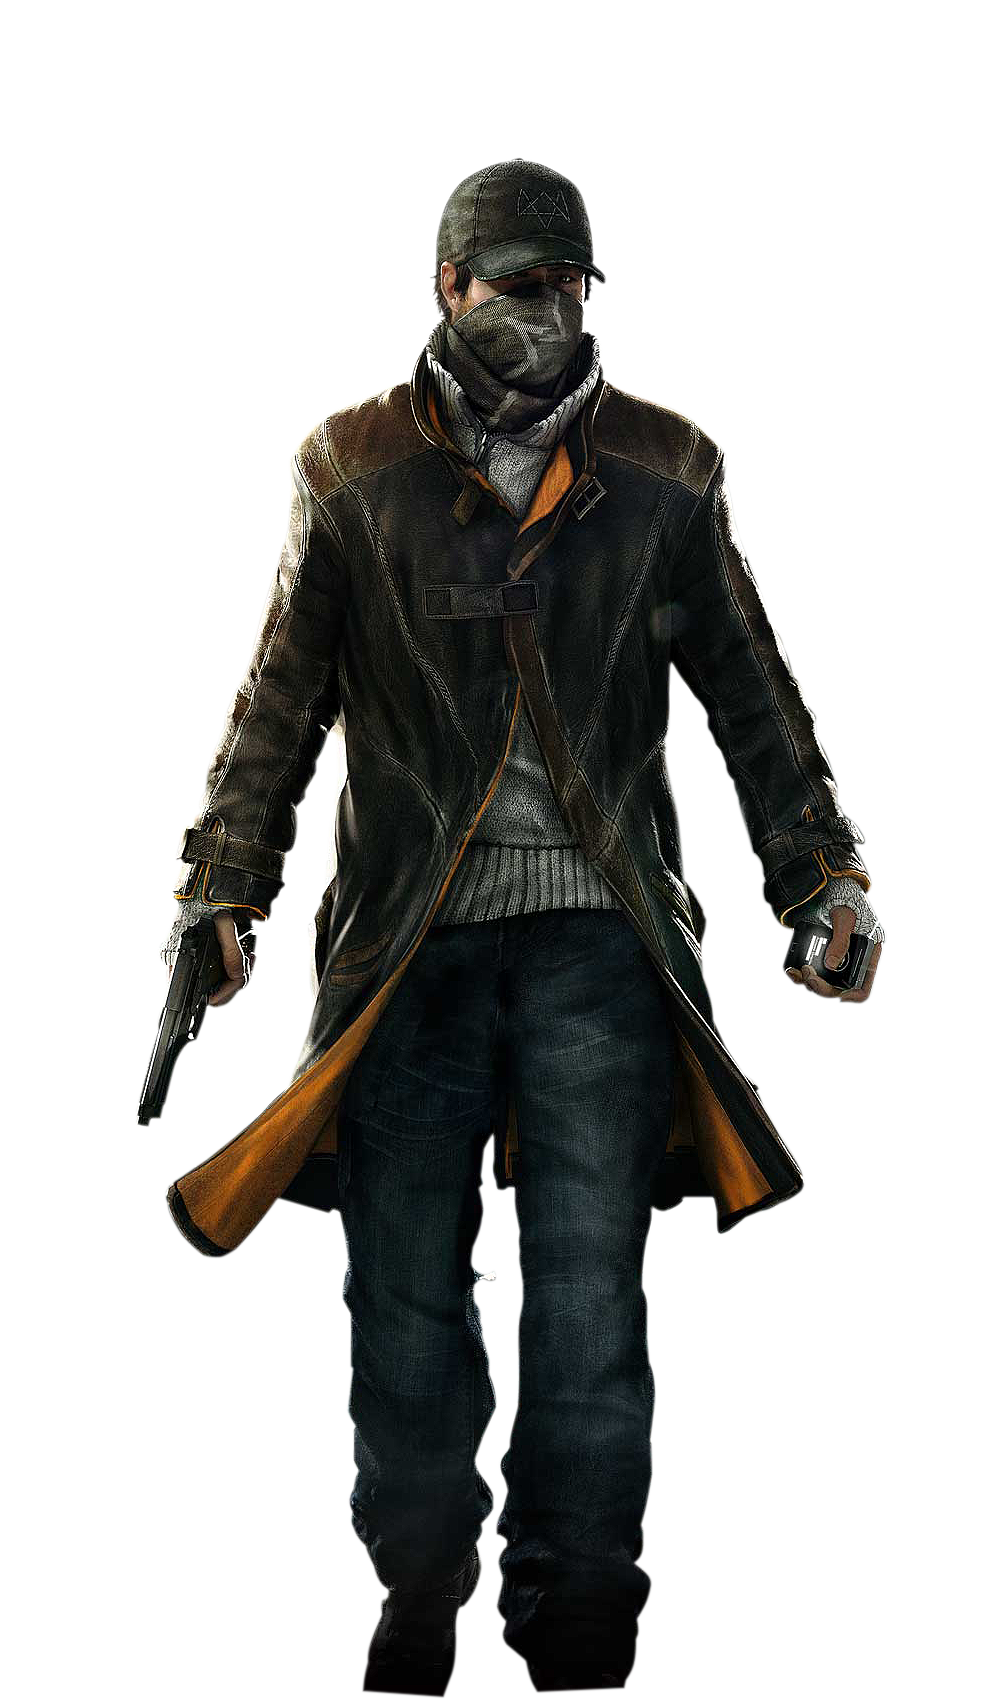 Watch Dogs PNG Pic, Watch Dogs PNG - Free PNG